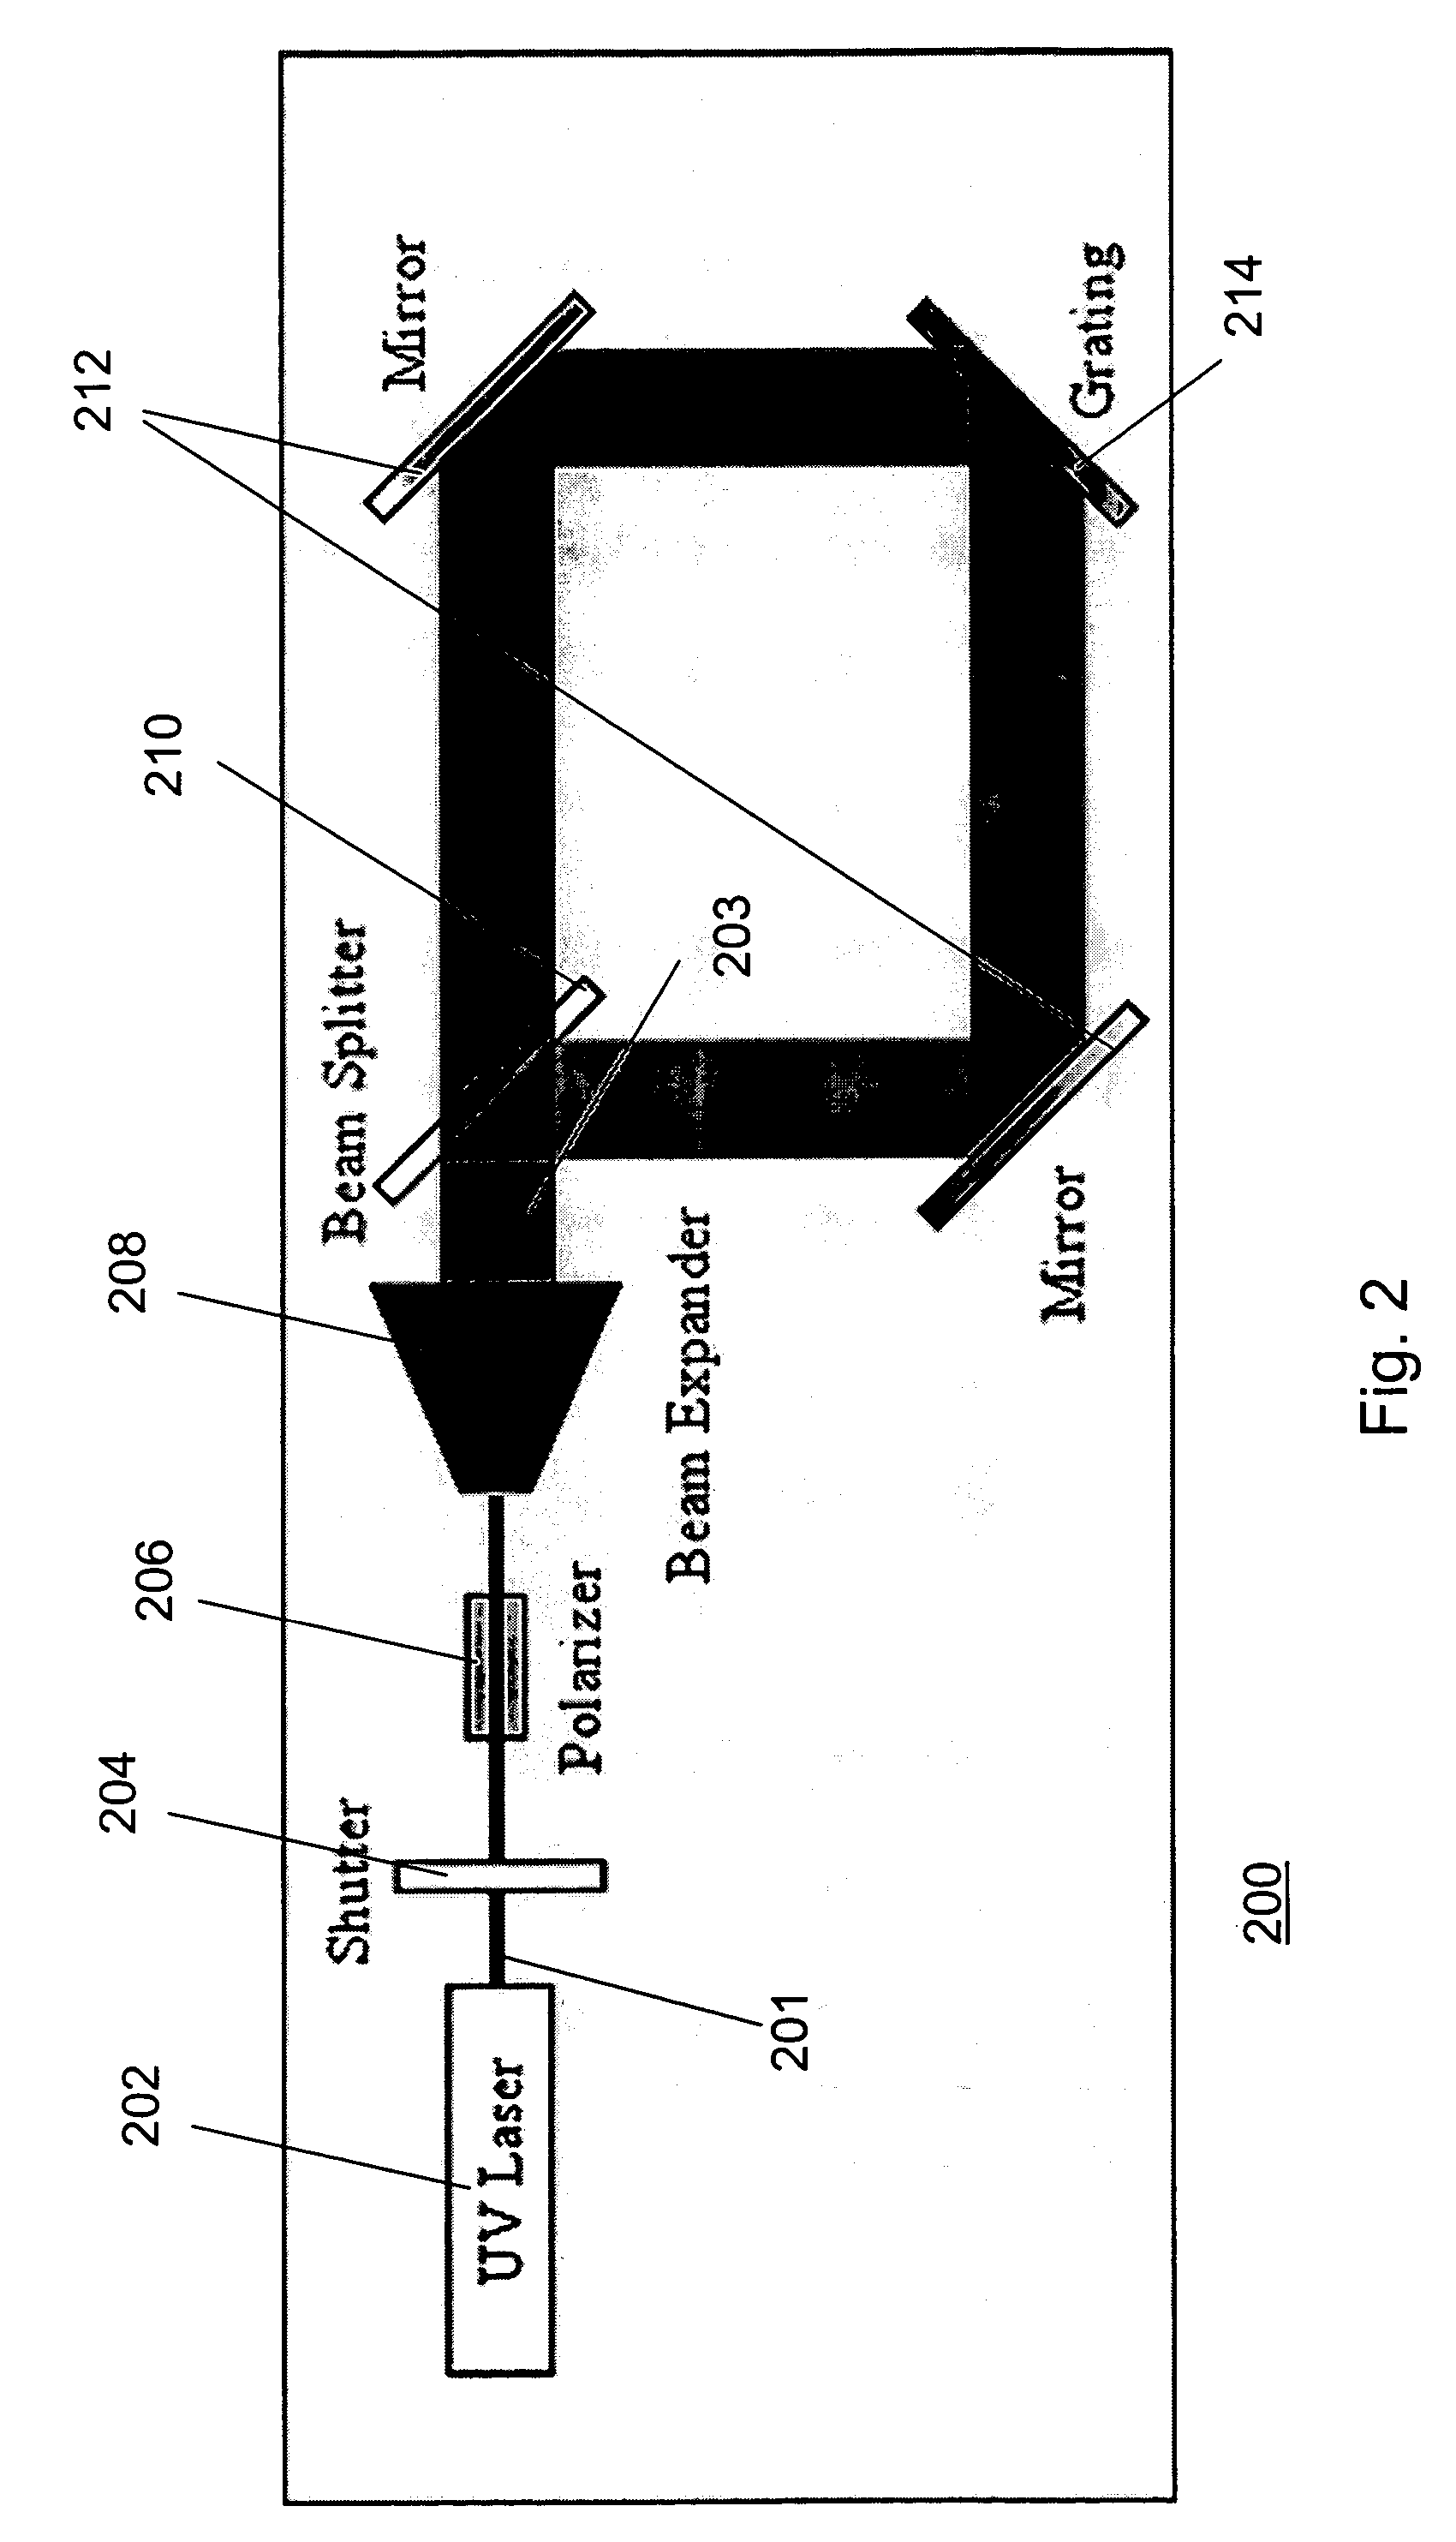 Optical switching device using holographic polymer dispersed liquid crystals